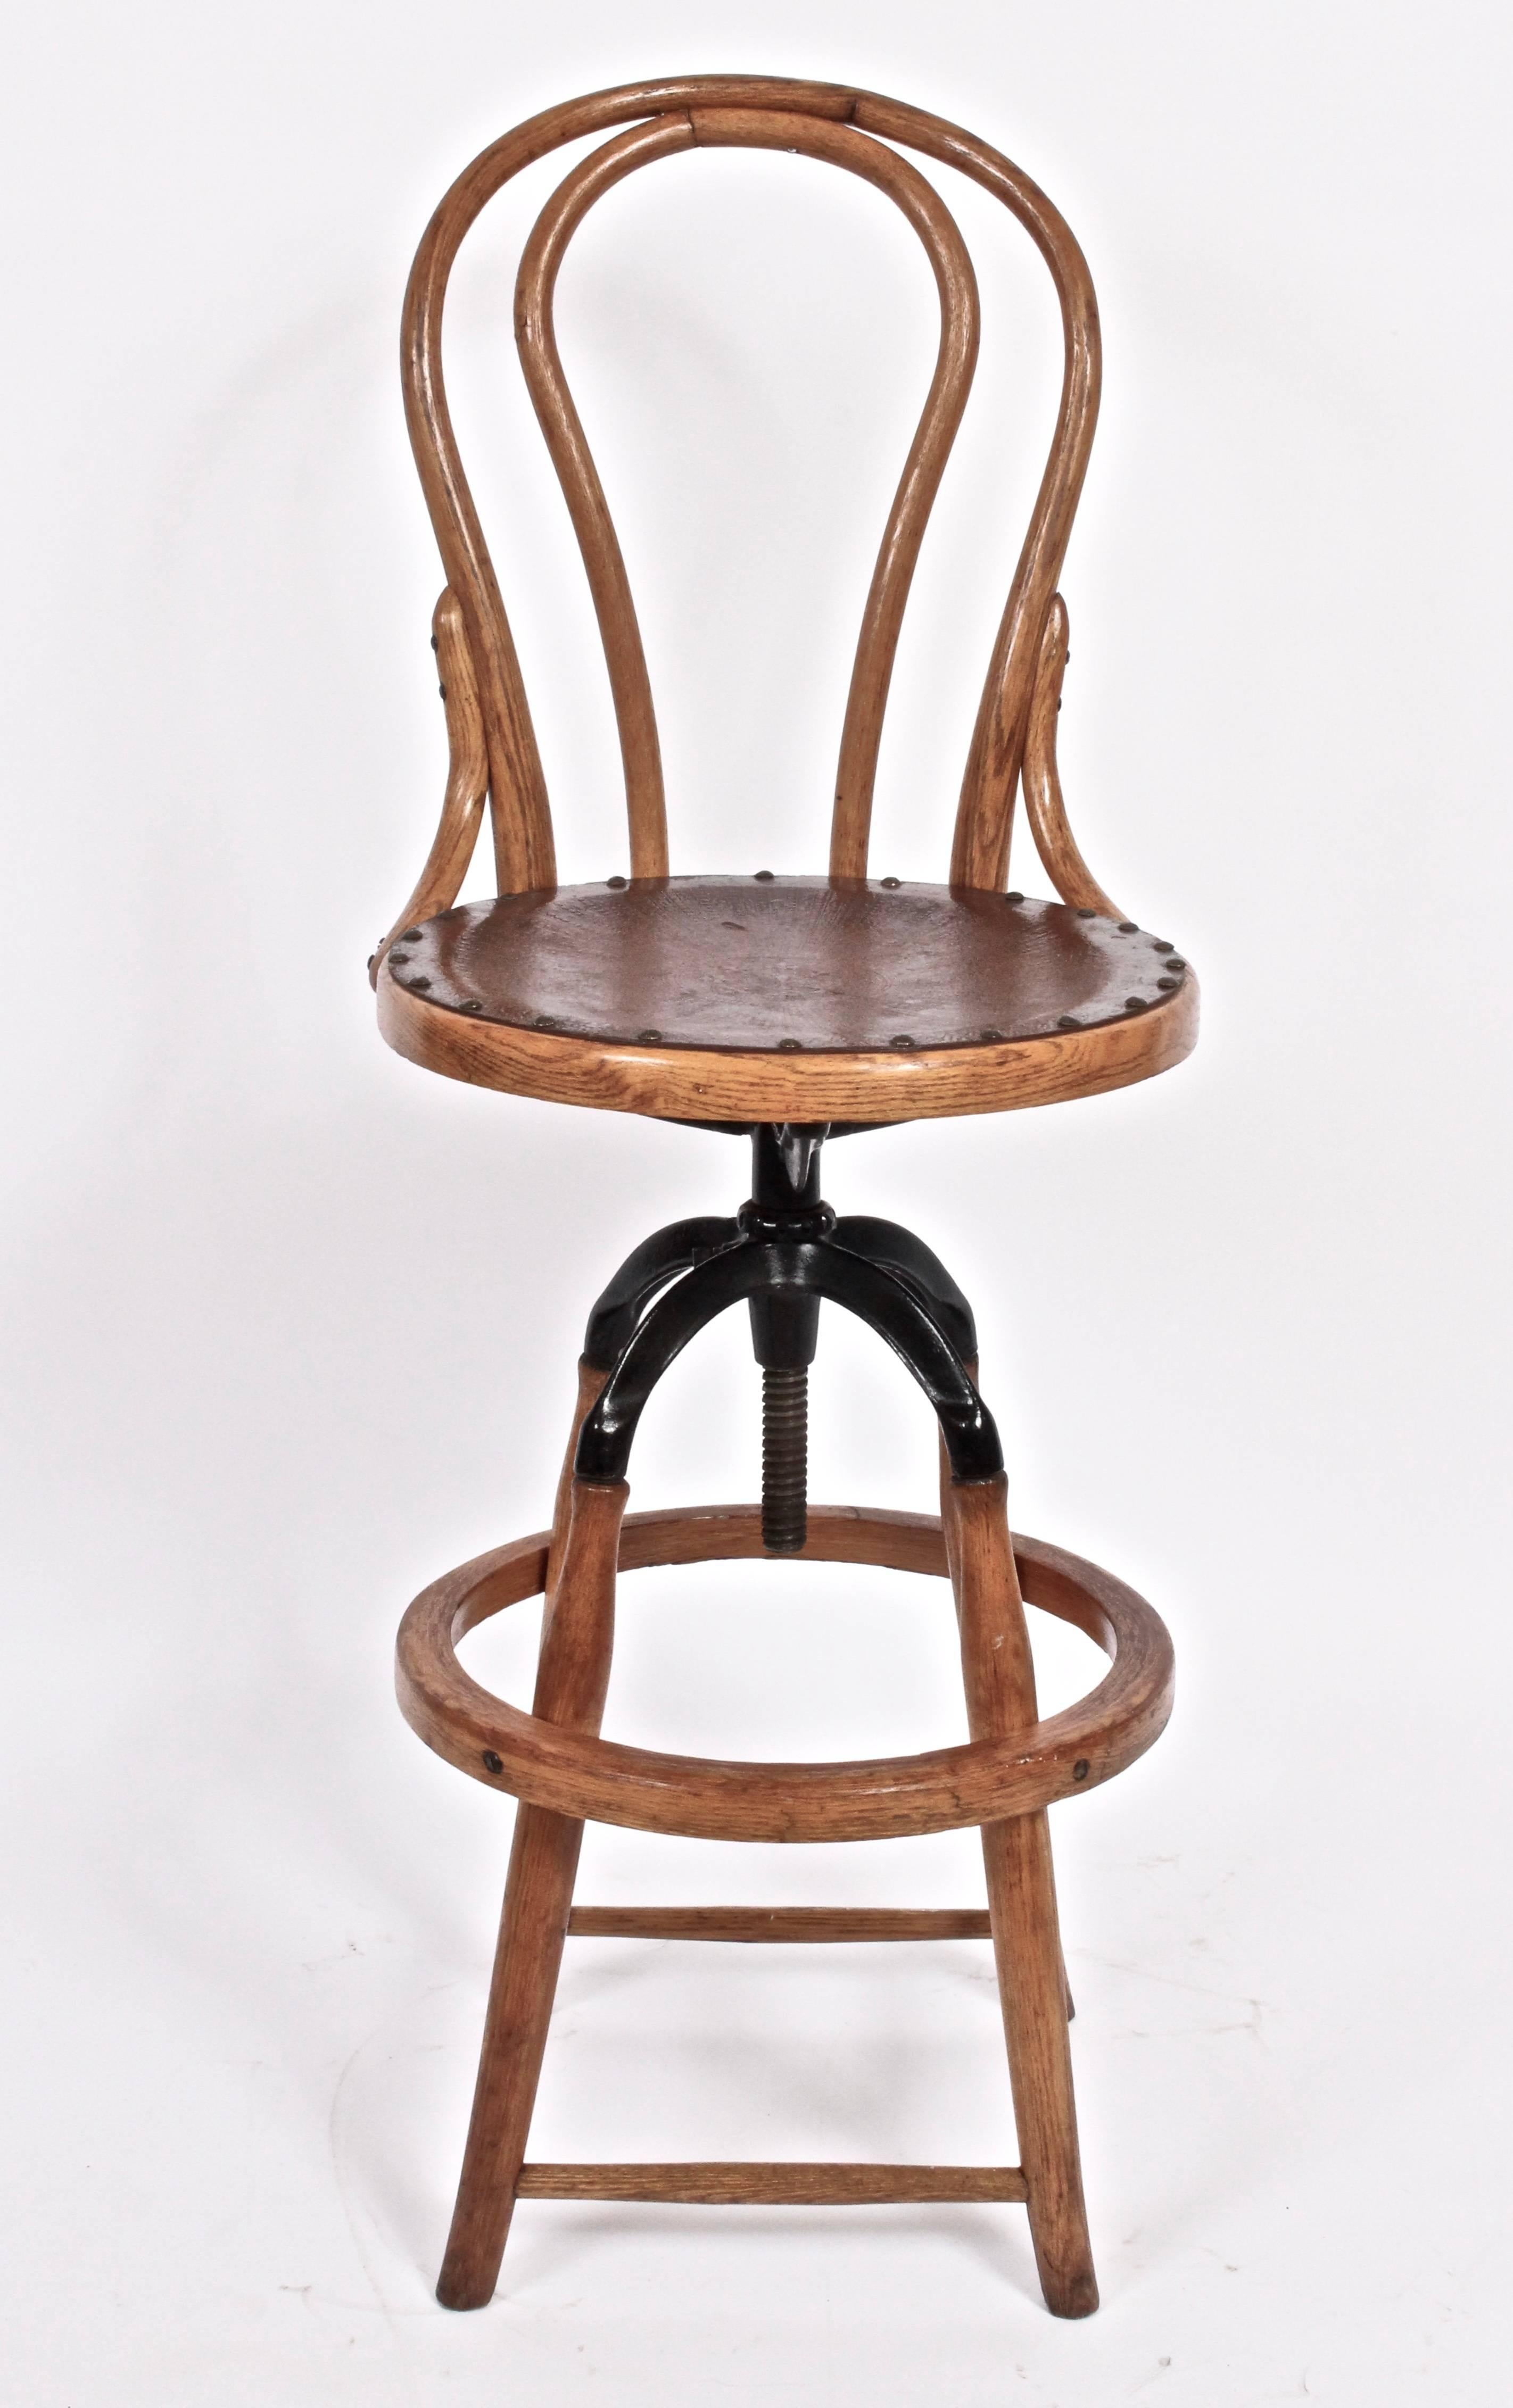 Turn of the Century Architects Oak and Black enameled Iron swivel Stool with Oak heel ring. Oak tower base. Vintage Brown leather seat. Adjustable height. Seat height up to 31H (Seat height range 27-31). Versatile. Office. Counter. Bar. Kitchen.